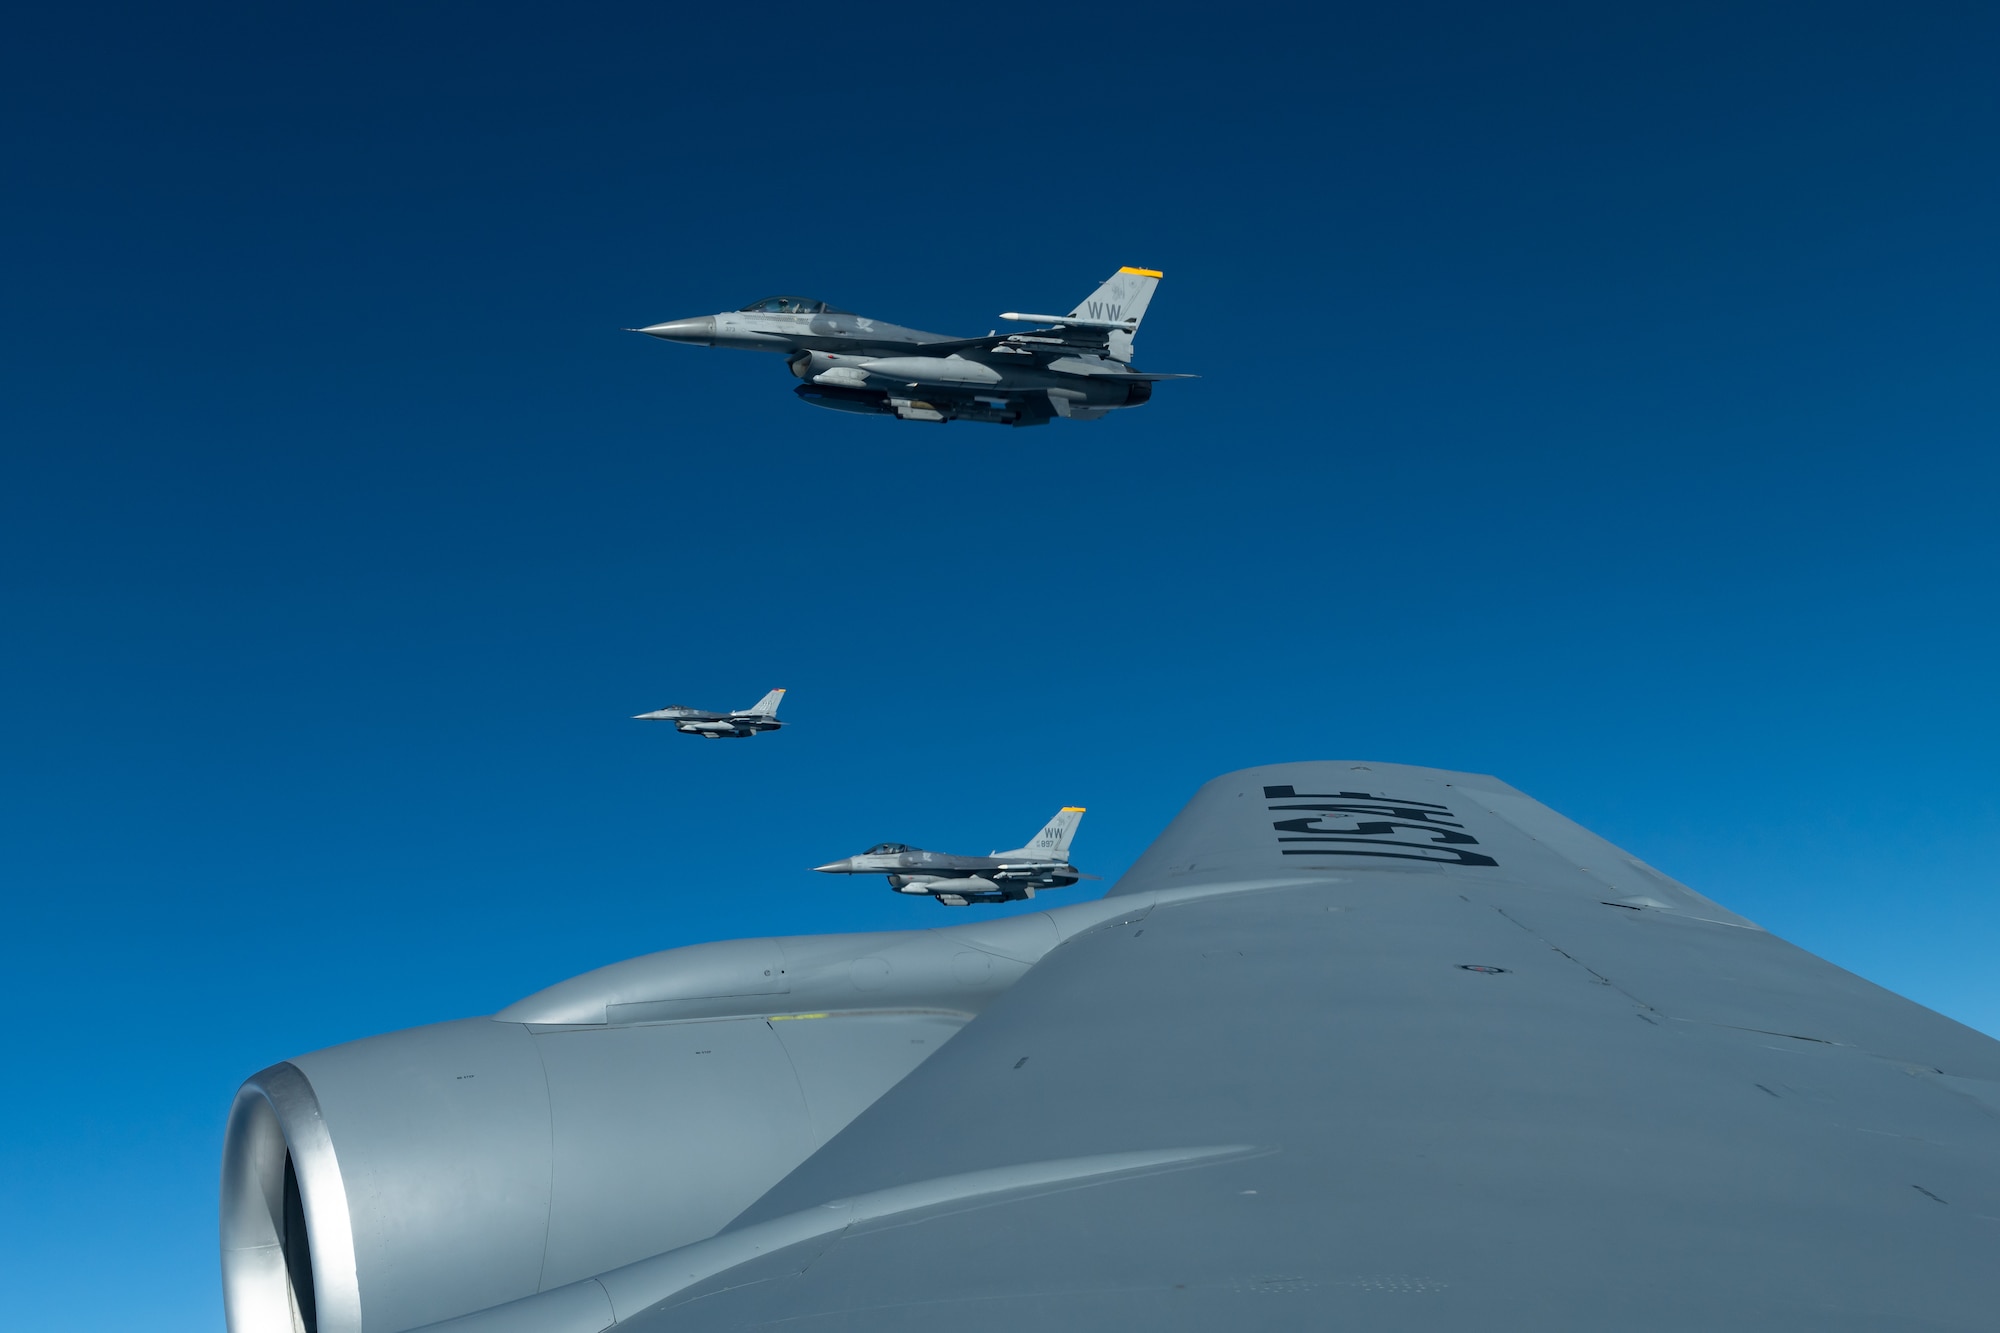 Three F-16CM Fighting Falcons from the 35th Fighter Wing, Misawa Air Base, fly during a routine training exercise off the coast of Japan, May 8, 2019. The 35th FW provides worldwide deployable forces with a sustained forward presence focused on maintaining a free-and-open Indo-Pacific. (U.S. Air Force photo by Airman 1st Class Matthew Seefeldt)